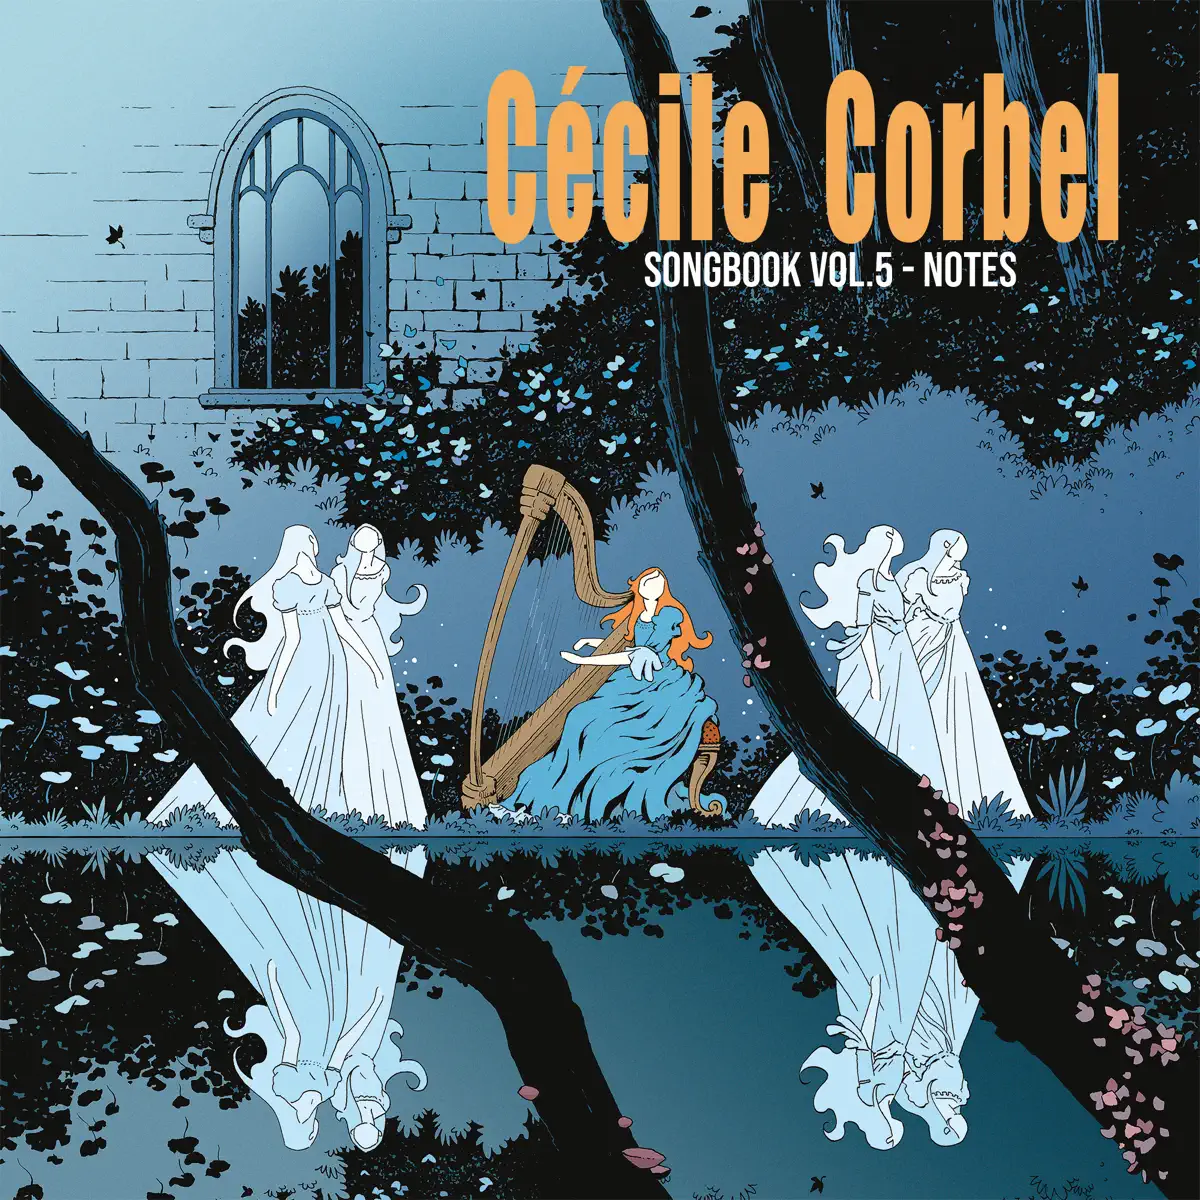 Cecile Corbel - SongBook, Vol. 5 (Notes) (2021) [iTunes Plus AAC M4A]-新房子